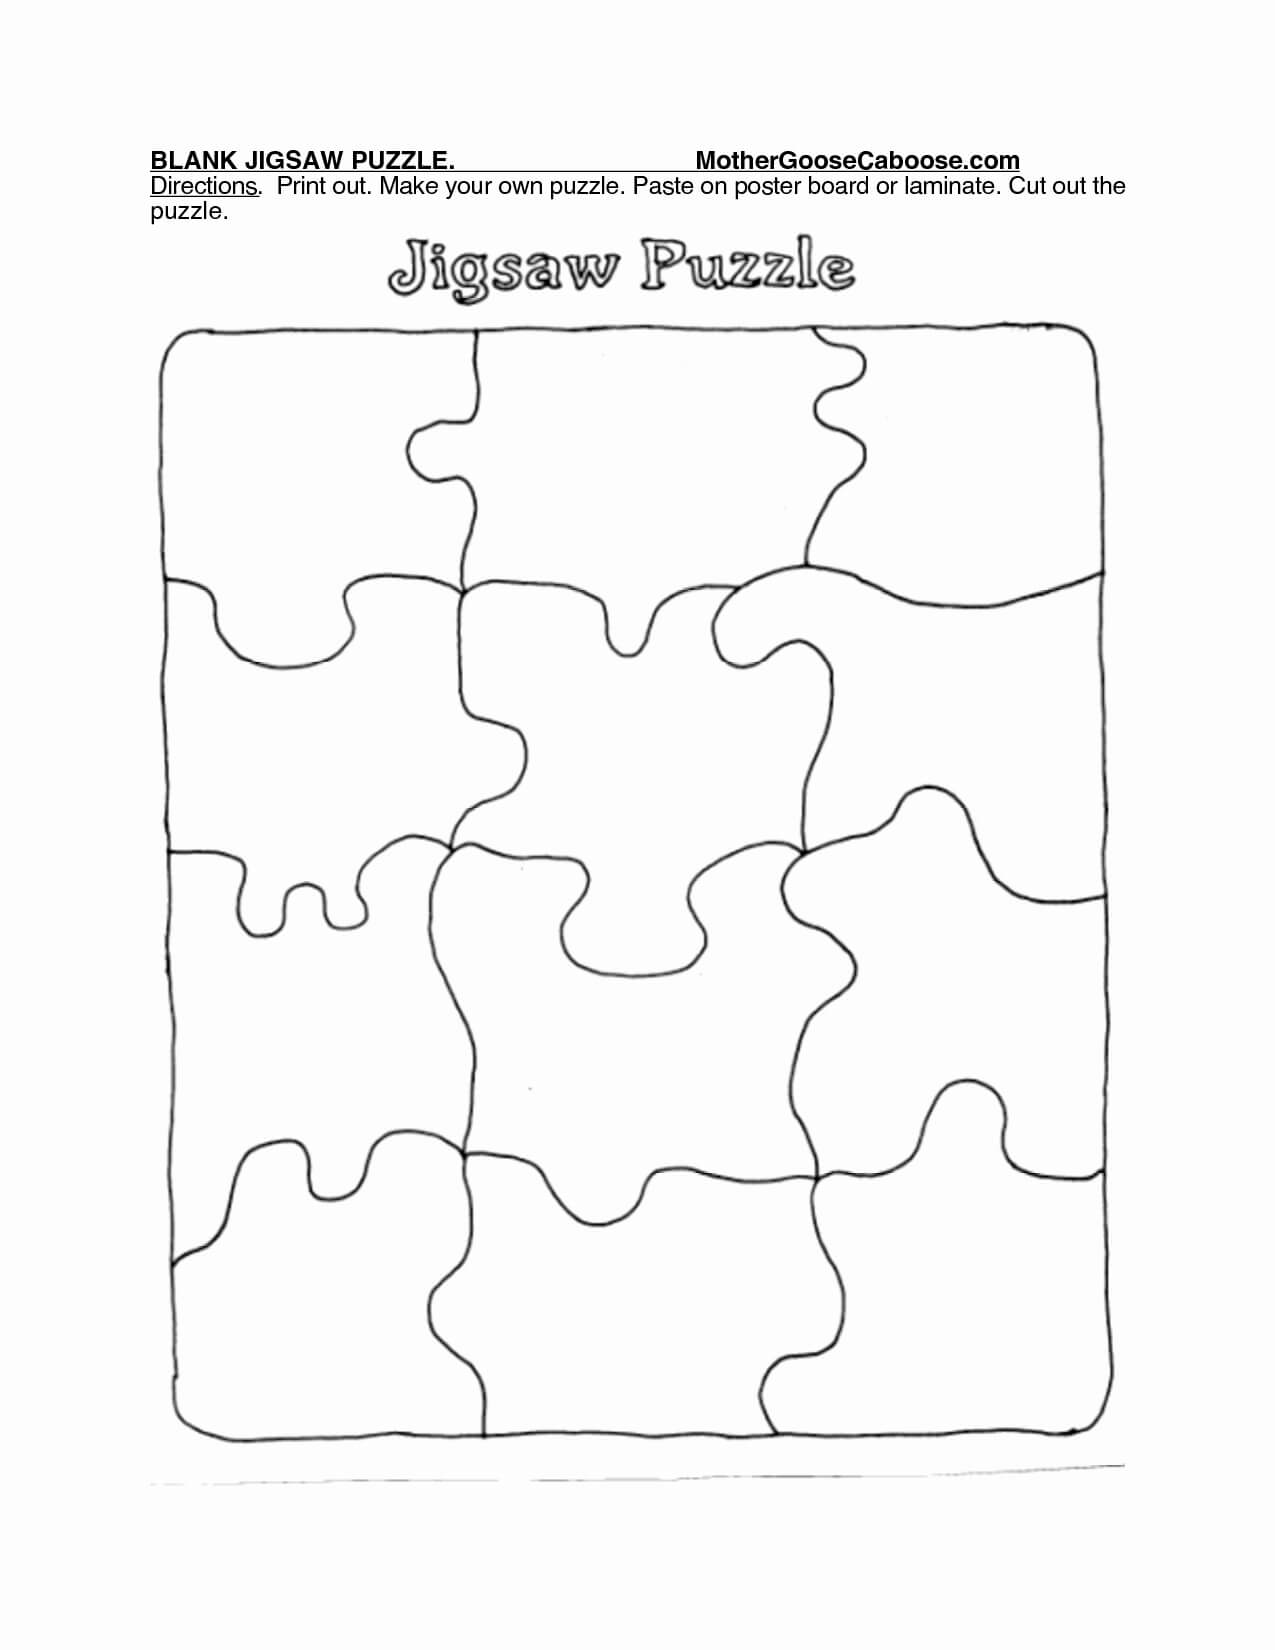 Puzzle Pieces Template For Word | Thedaisy Template Pages With Jigsaw Puzzle Template For Word